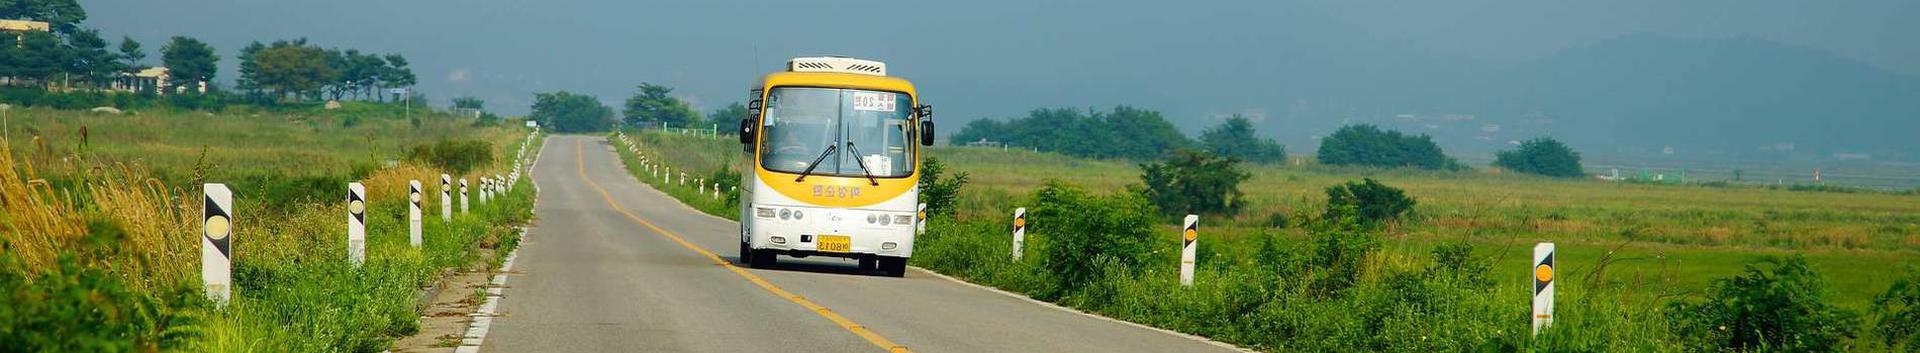 Renting of buses with driver, Passenger transport